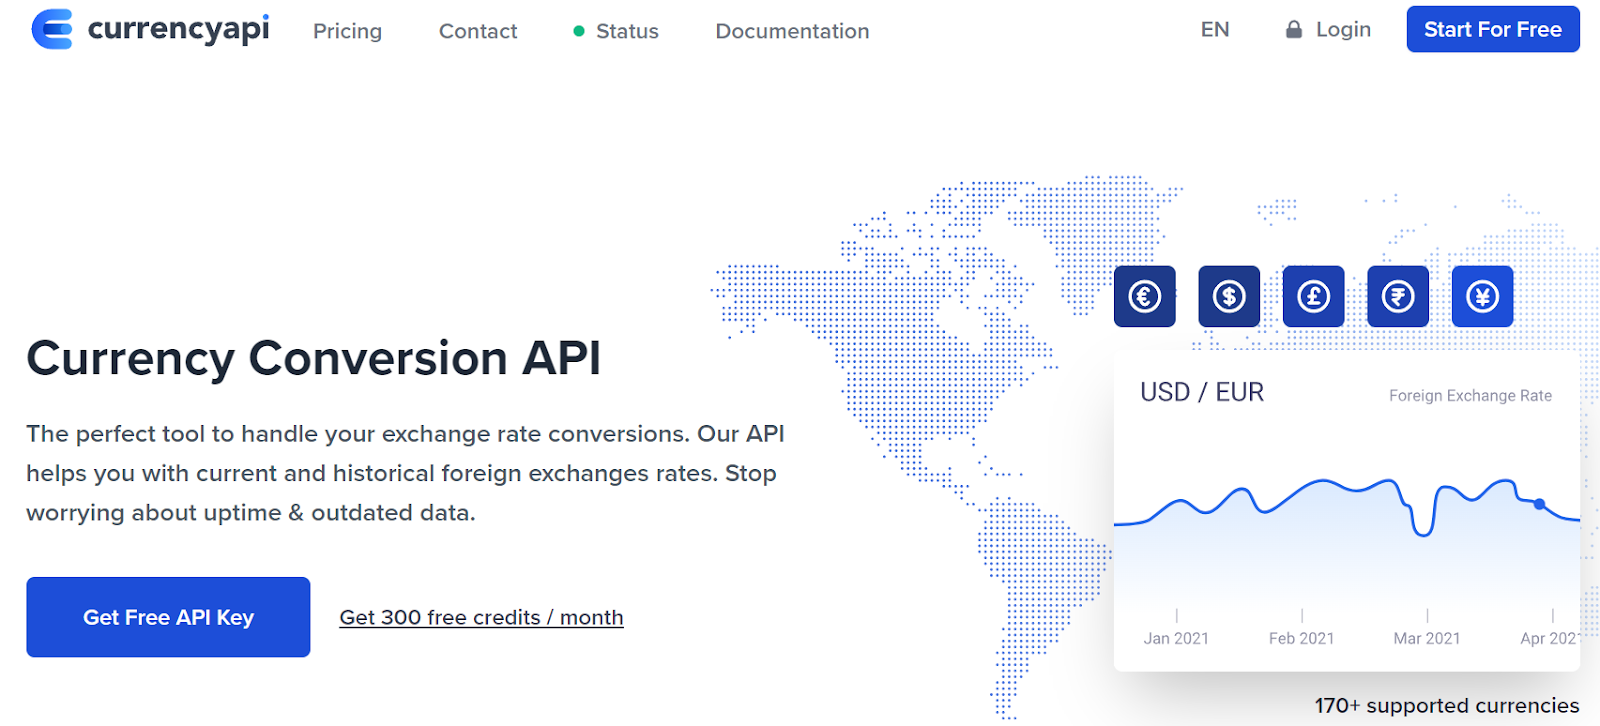 home page of the currencyapi